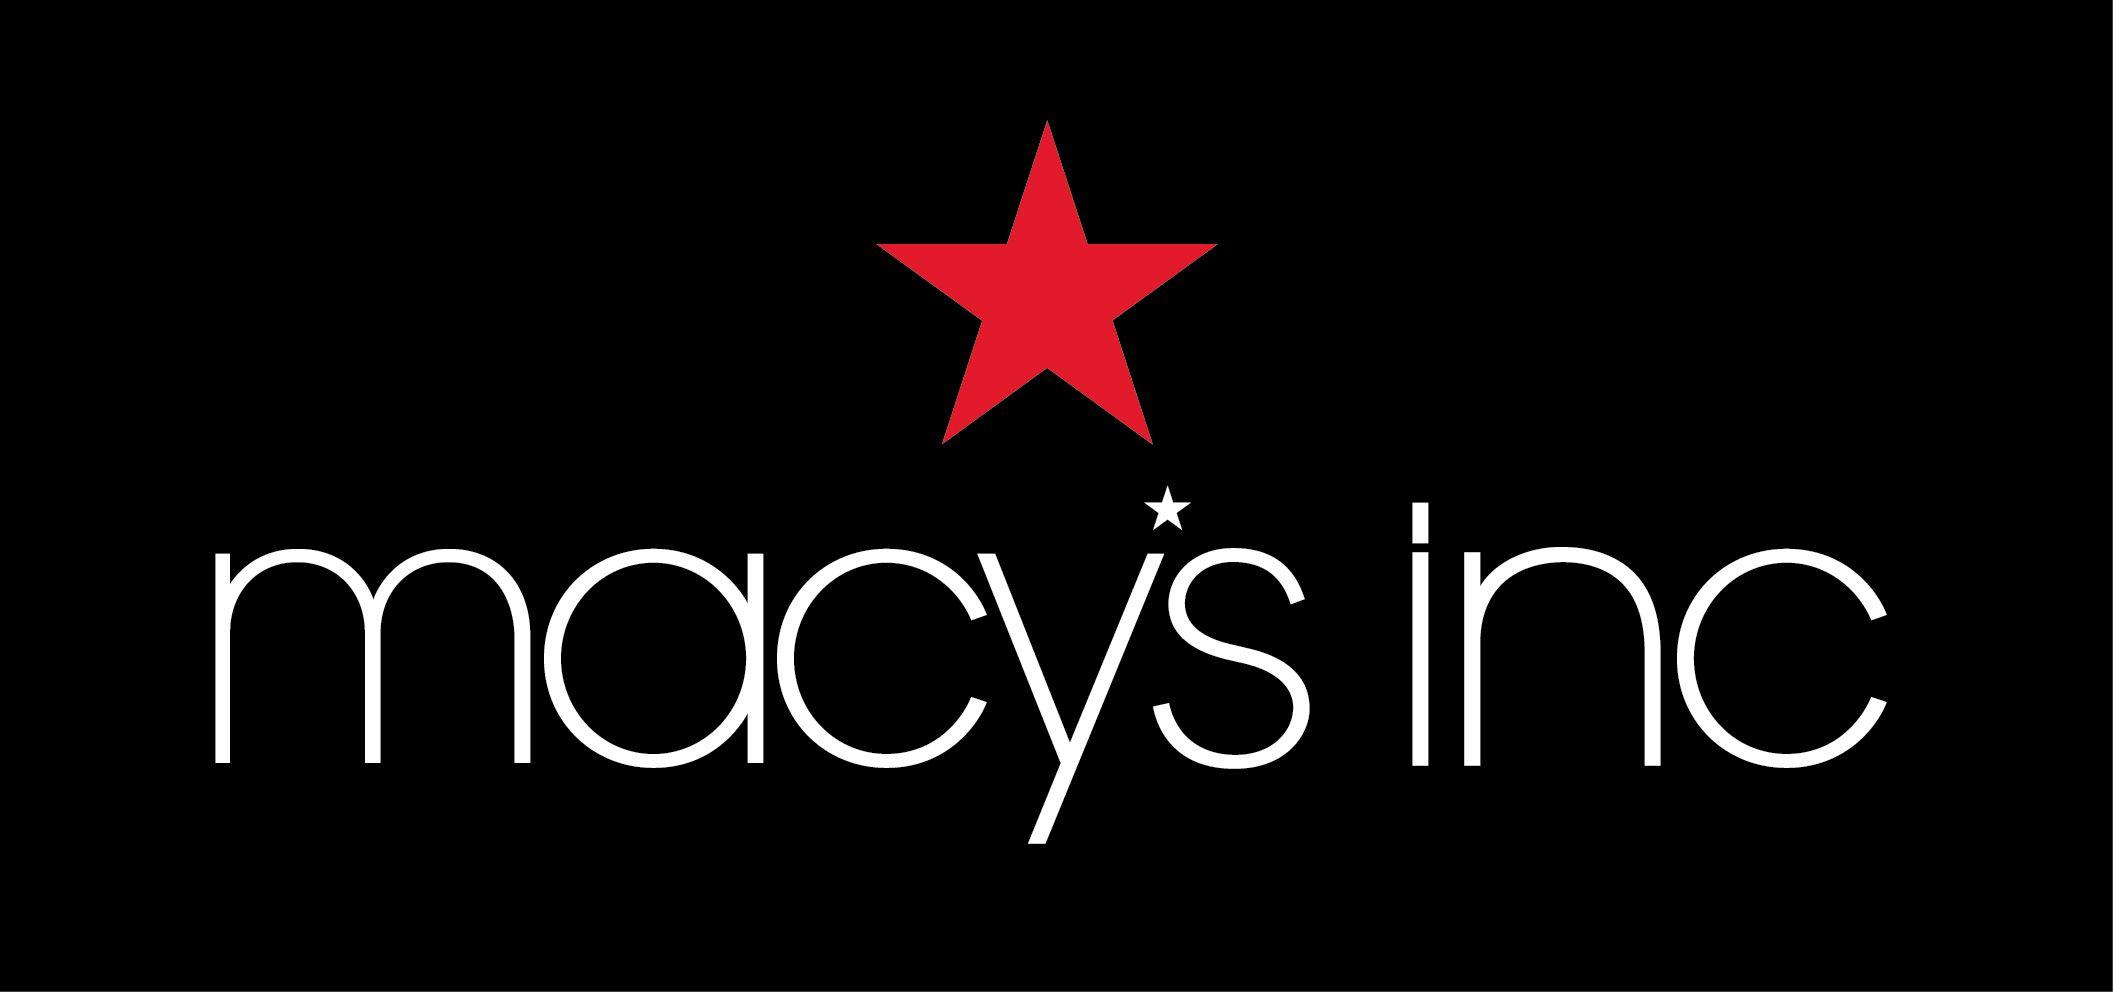 Macy's Red Star Logo - Macy's to close 35 to 40 underperforming stores in early 2016